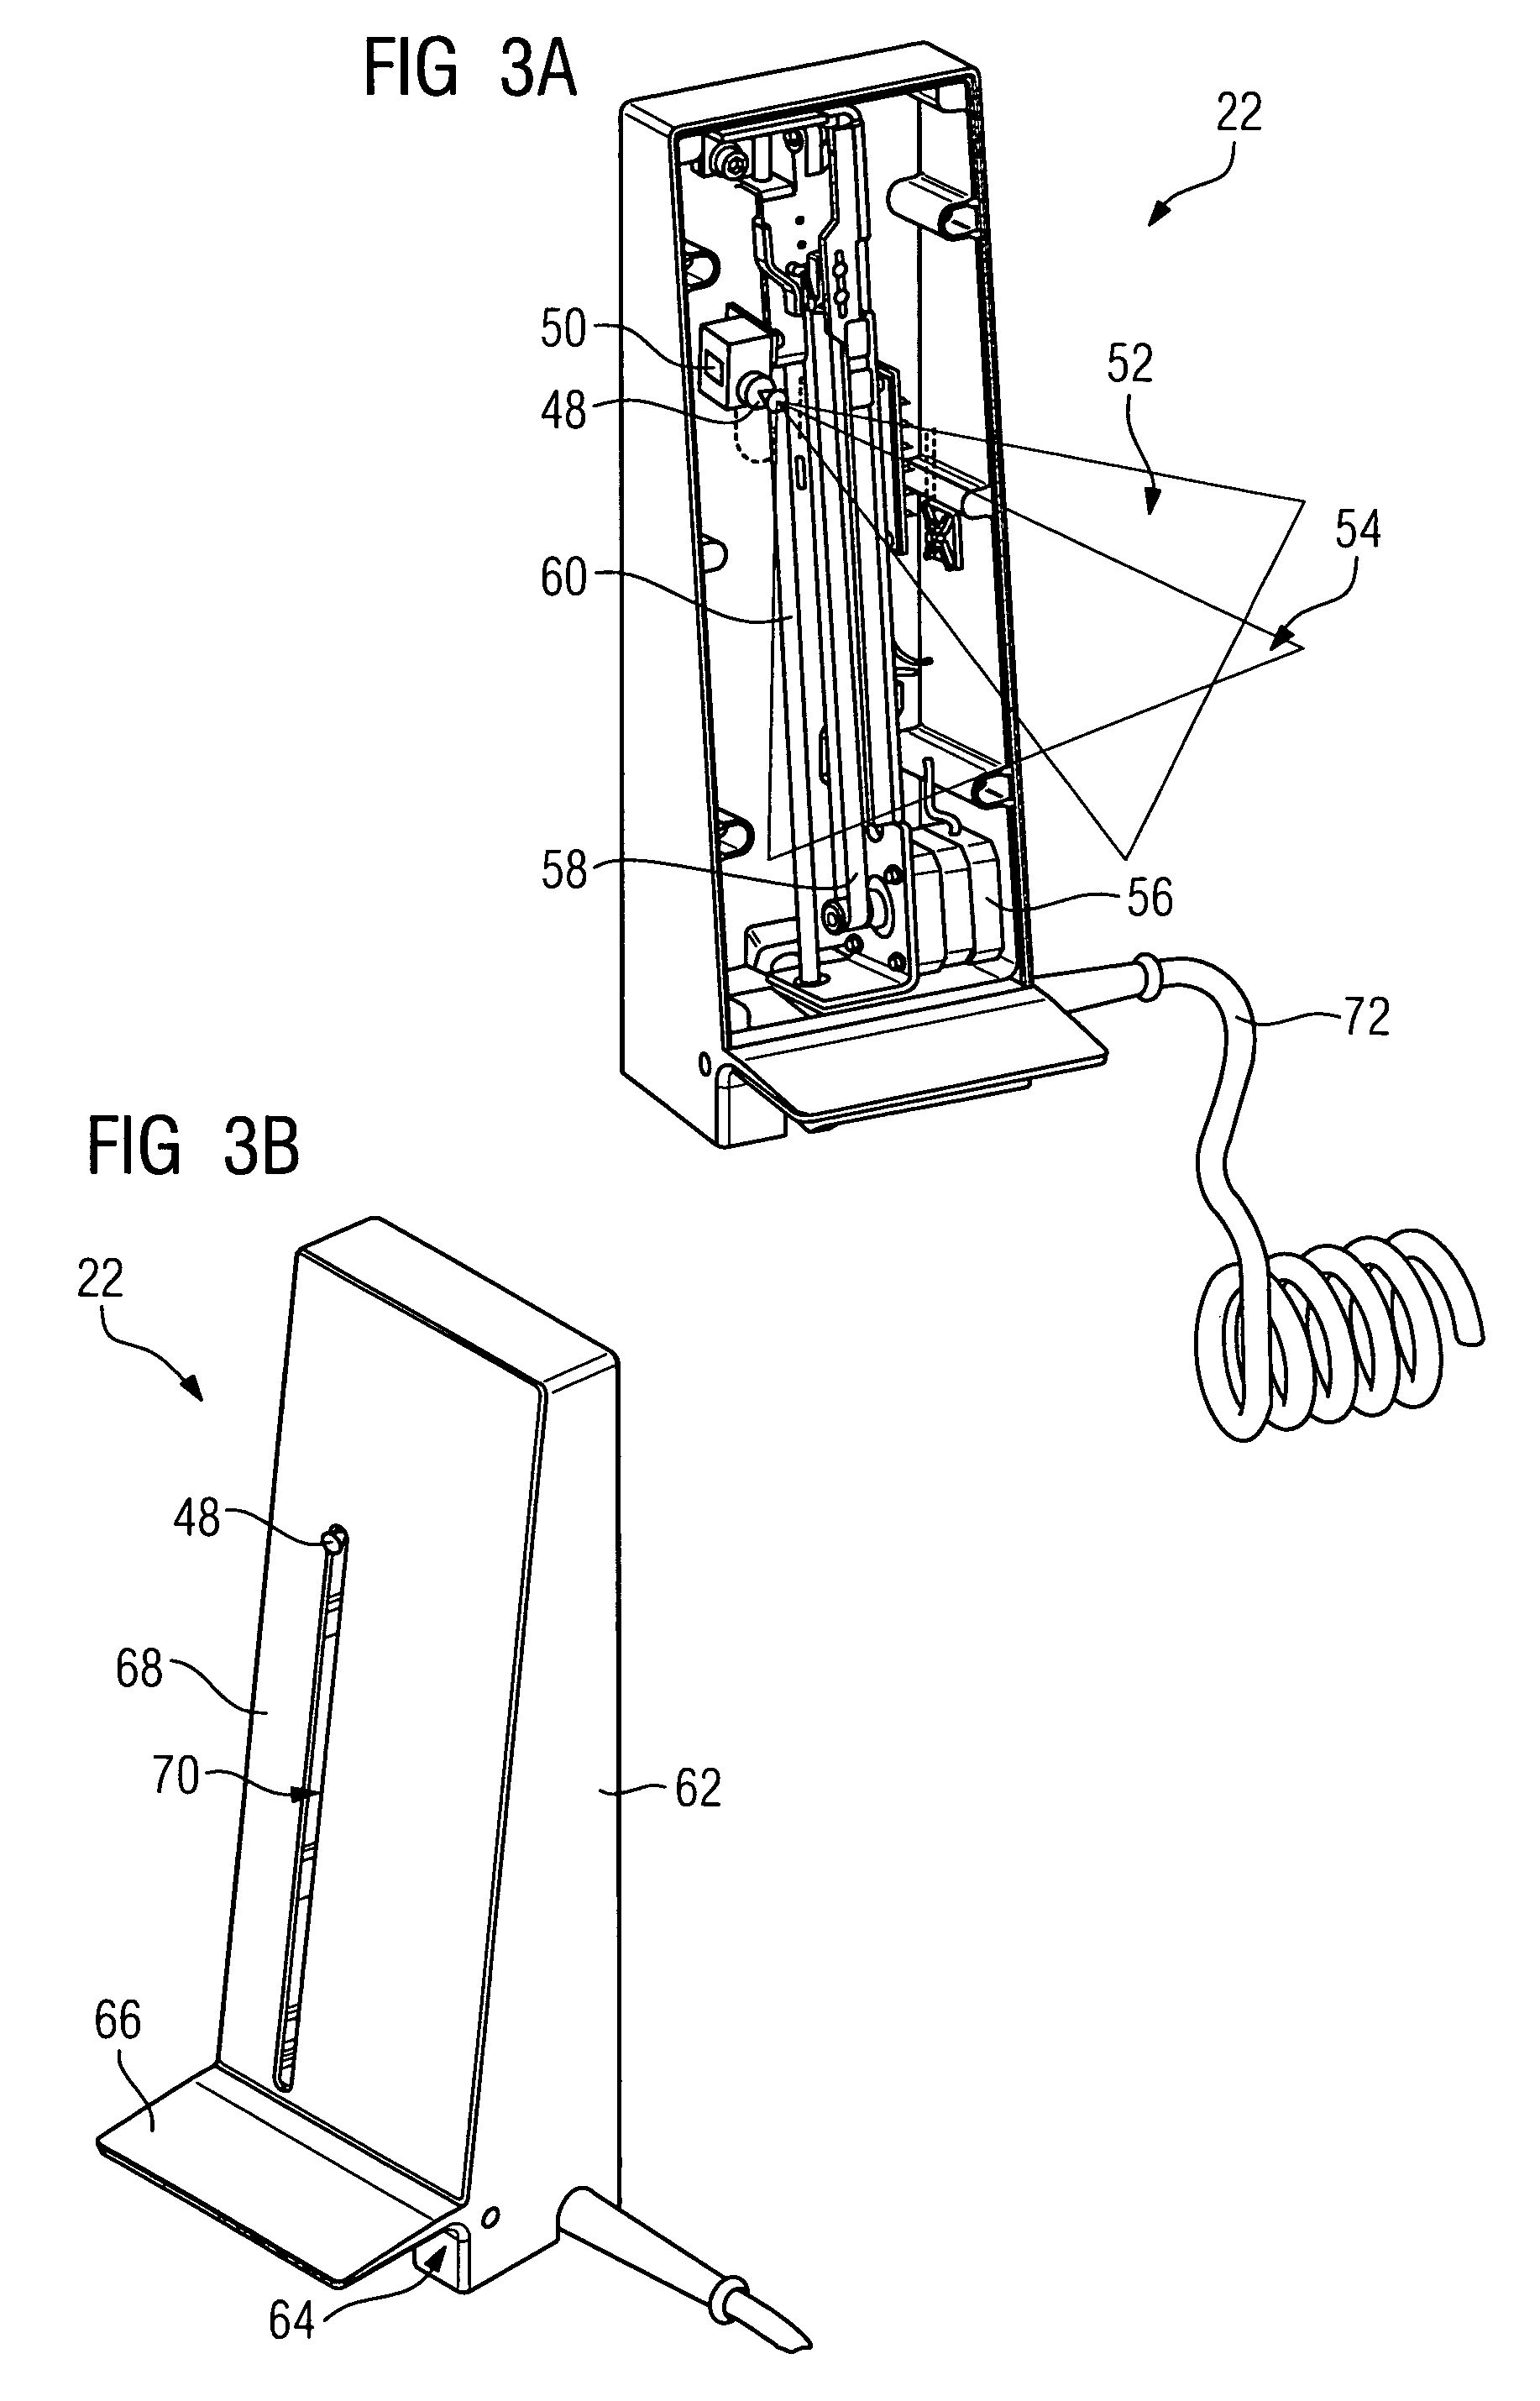 Method for generating an X-ray image of an extremity of a patient with a scale of length